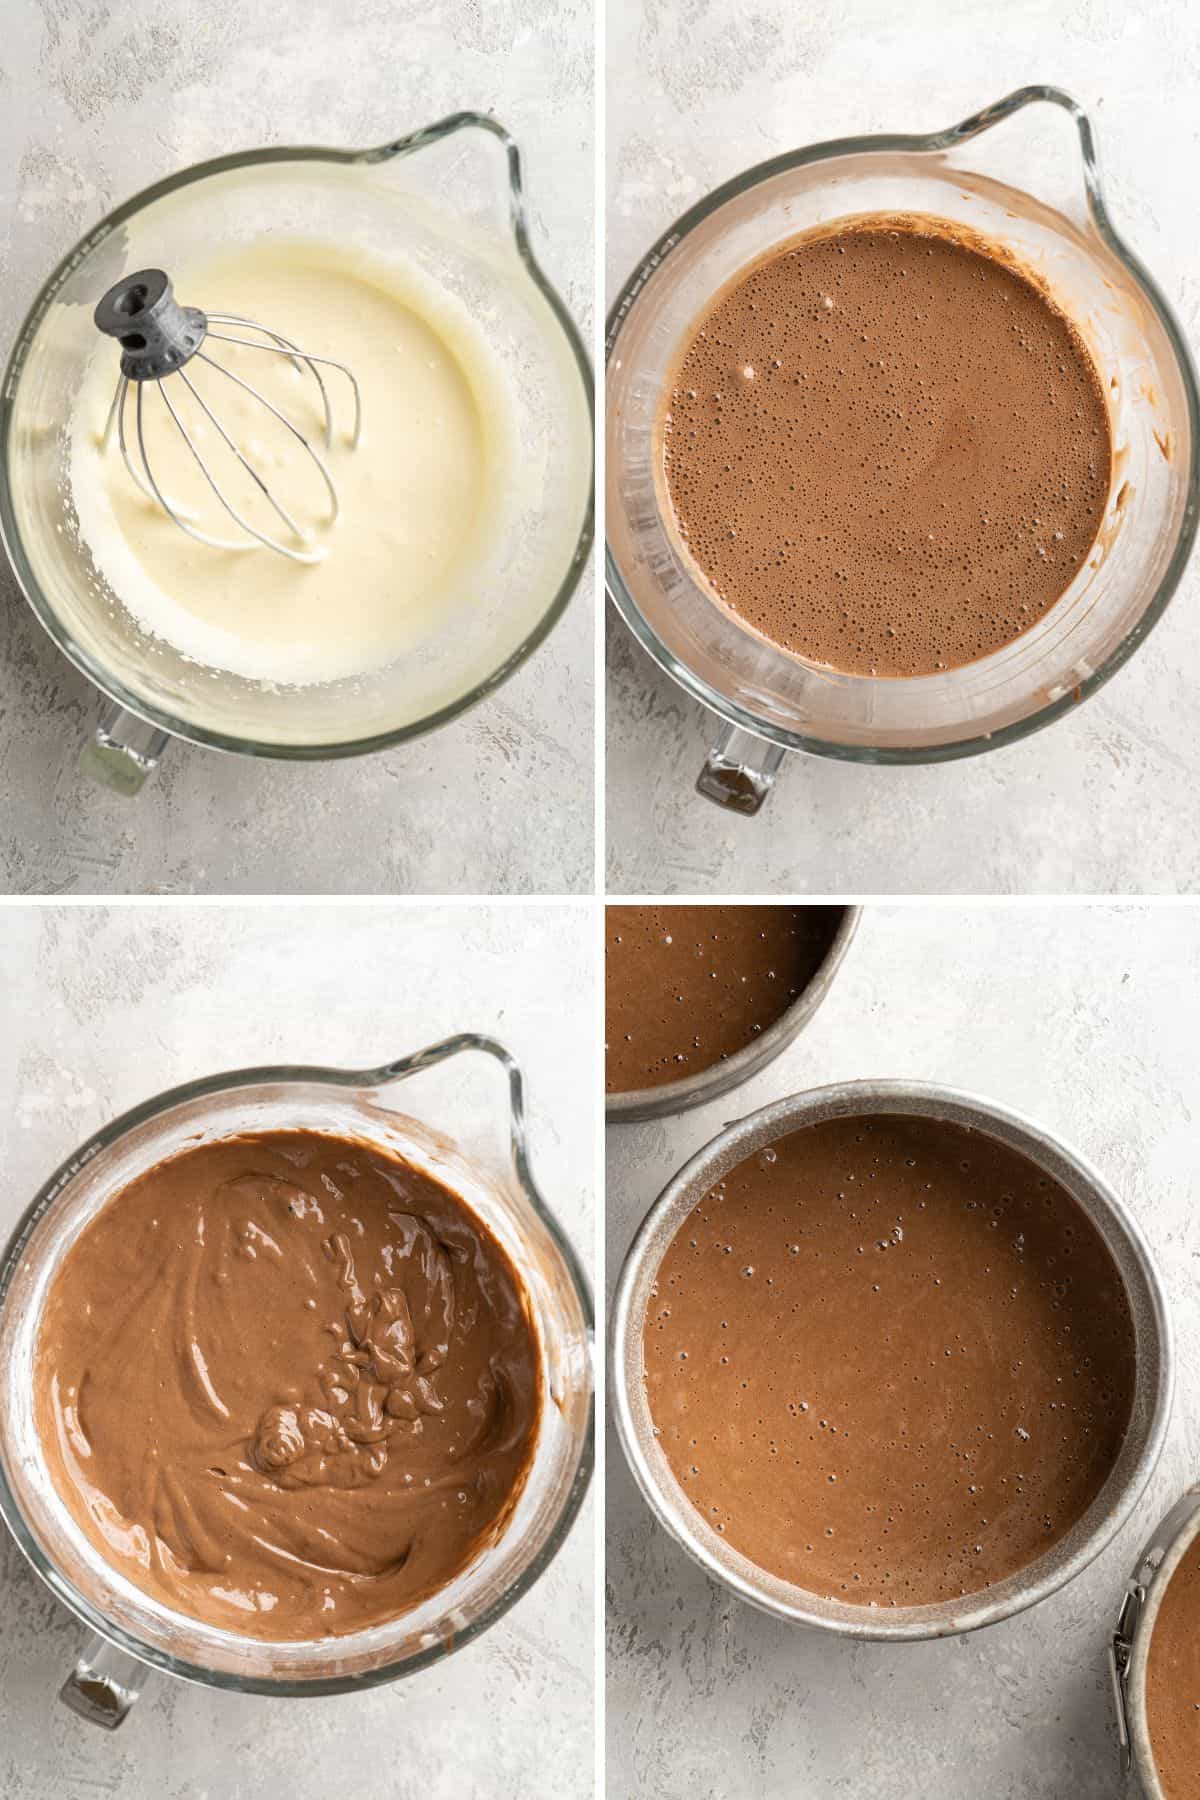 4 image collage showing how to make a chocolate cake batter